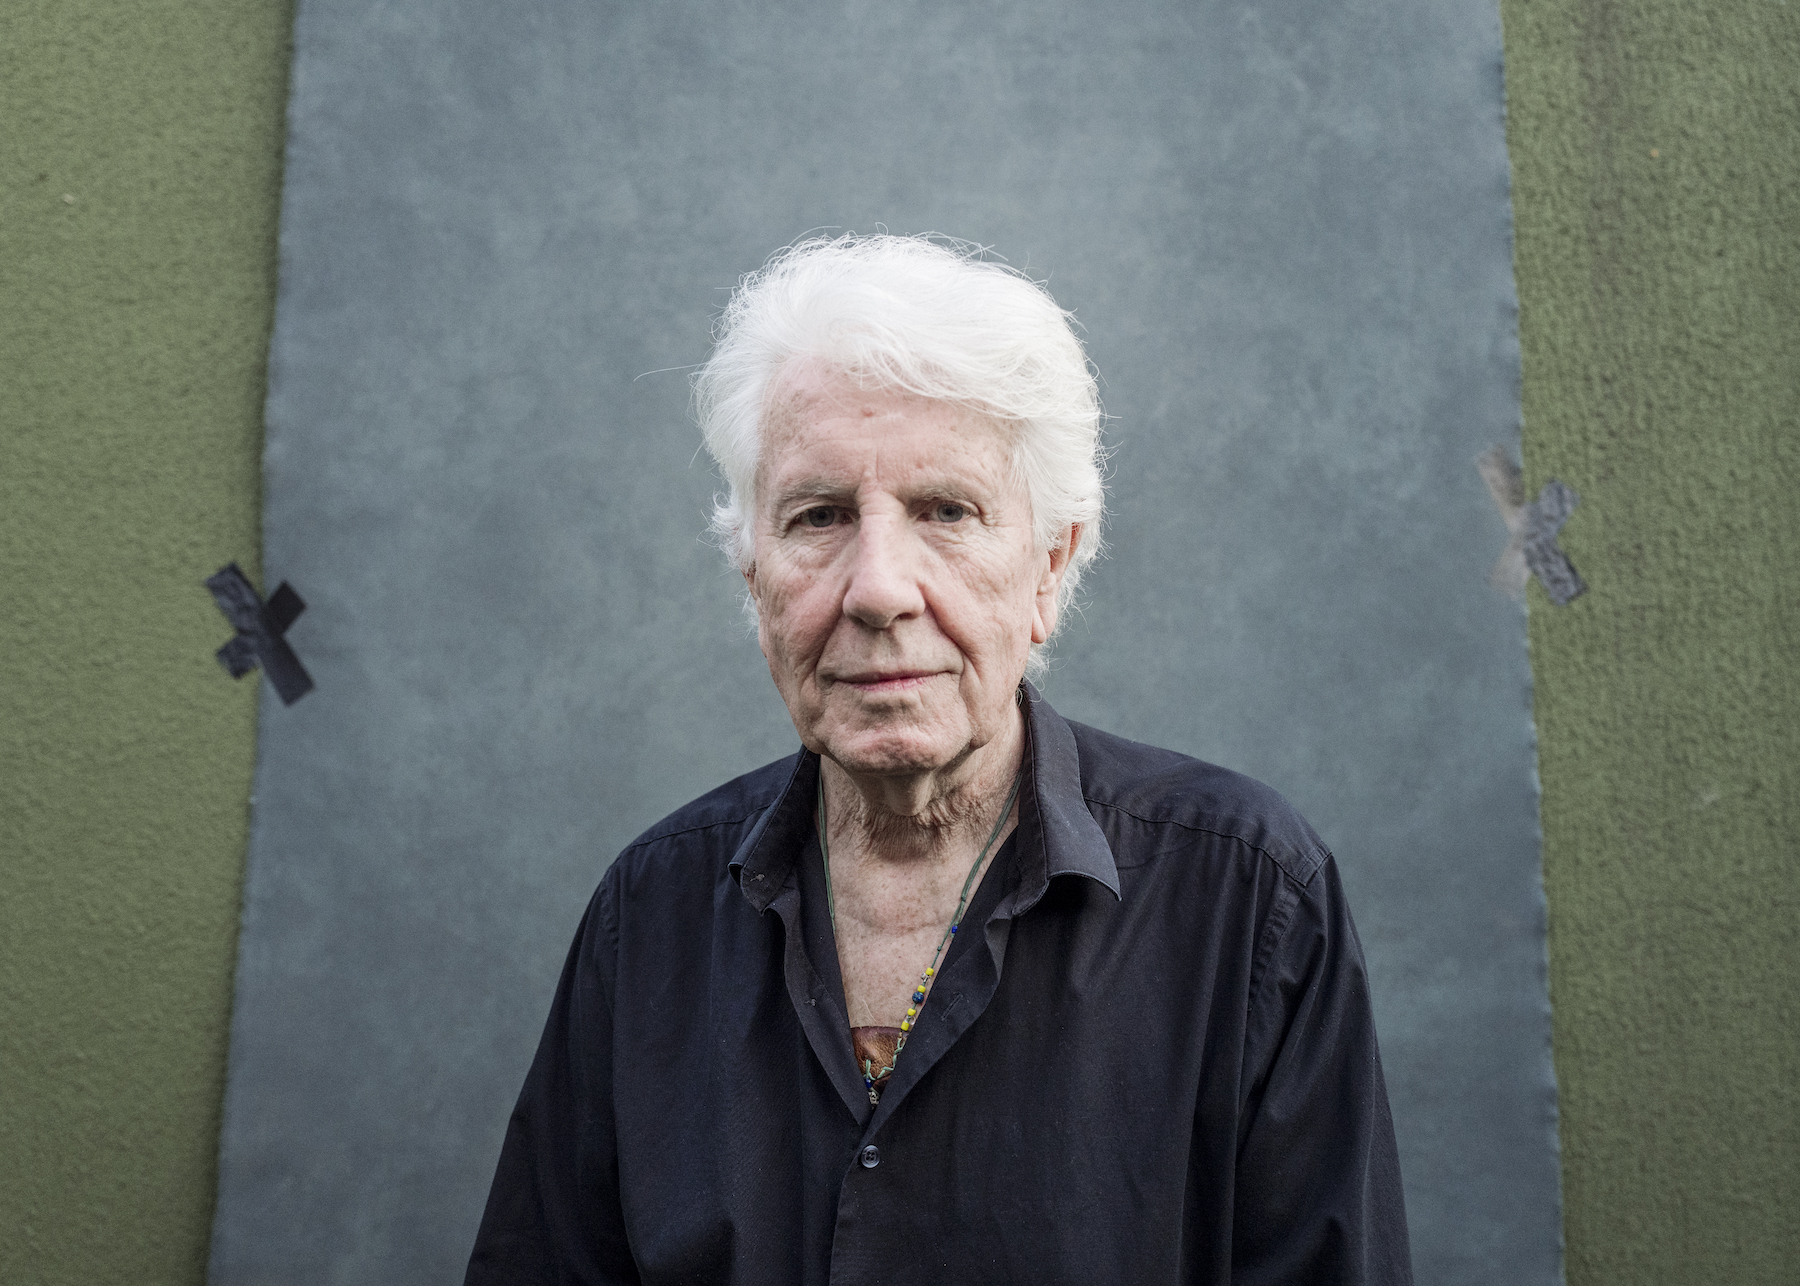 Graham Nash joins Neil Young to Remove Music From Spotify